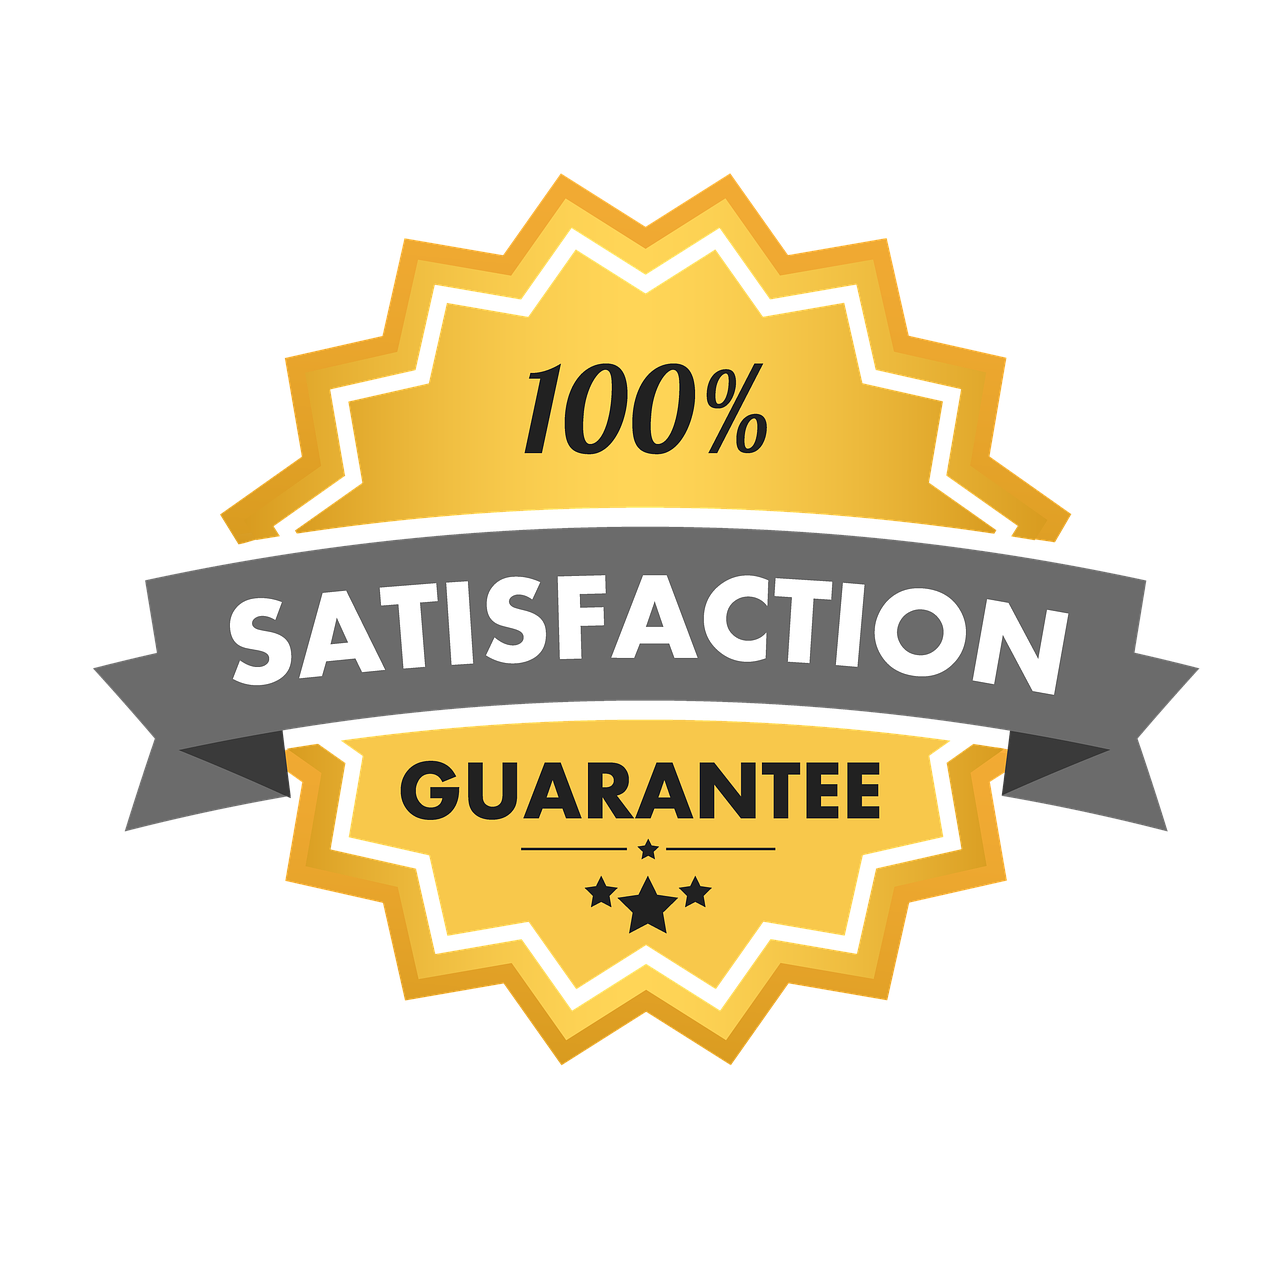 the satisfaction badge for satisfaction award